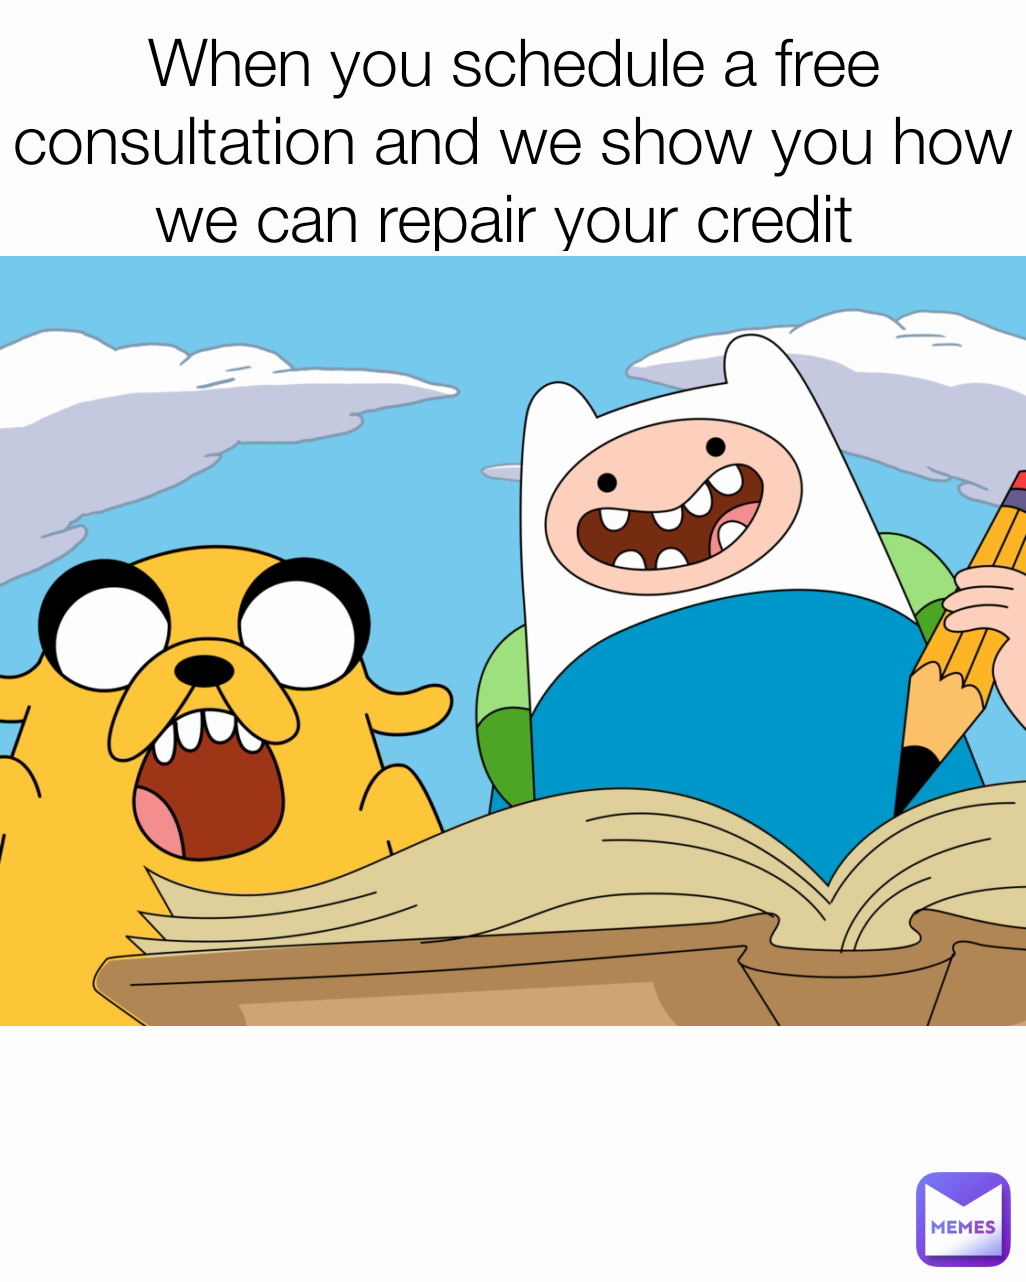 When you schedule a free consultation and we show you how we can repair your credit 